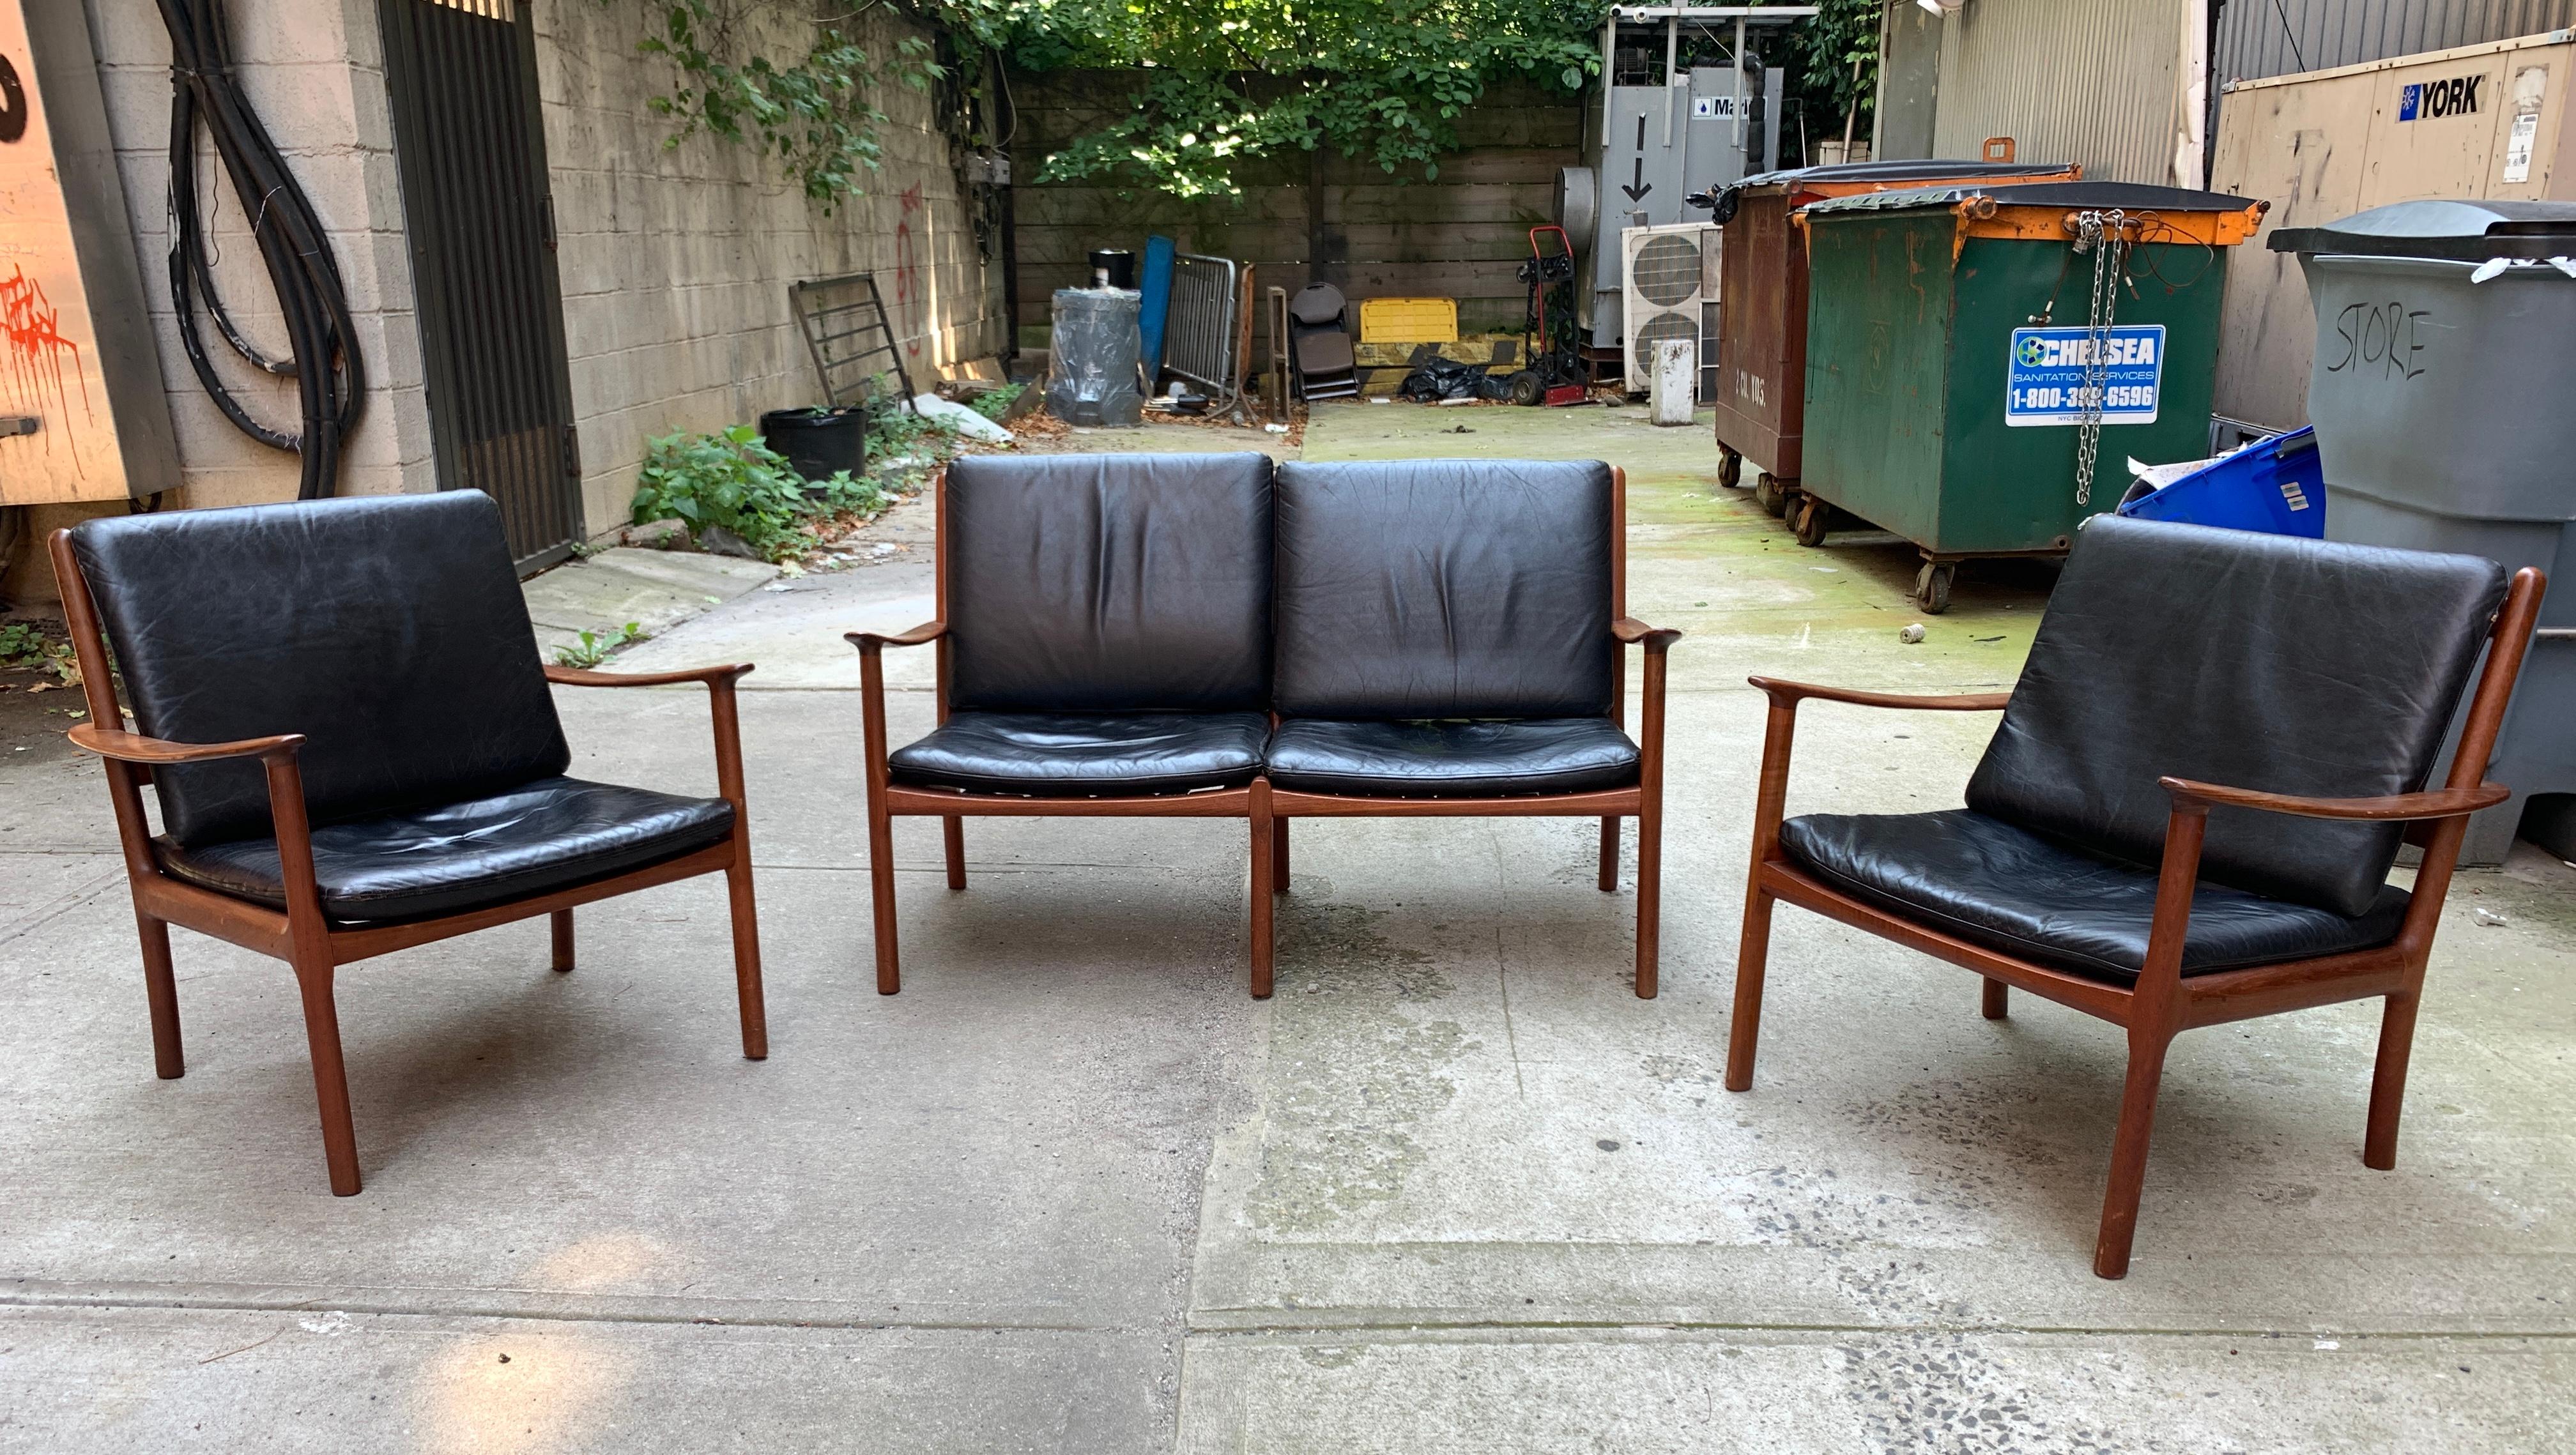 A handsome midcentury black leather sofa with two complimenting black leather chairs.
A clean statement seating for an airy setting.

The set consist of two chairs and a loveseat sofa.
Dimensions for chairs: 27